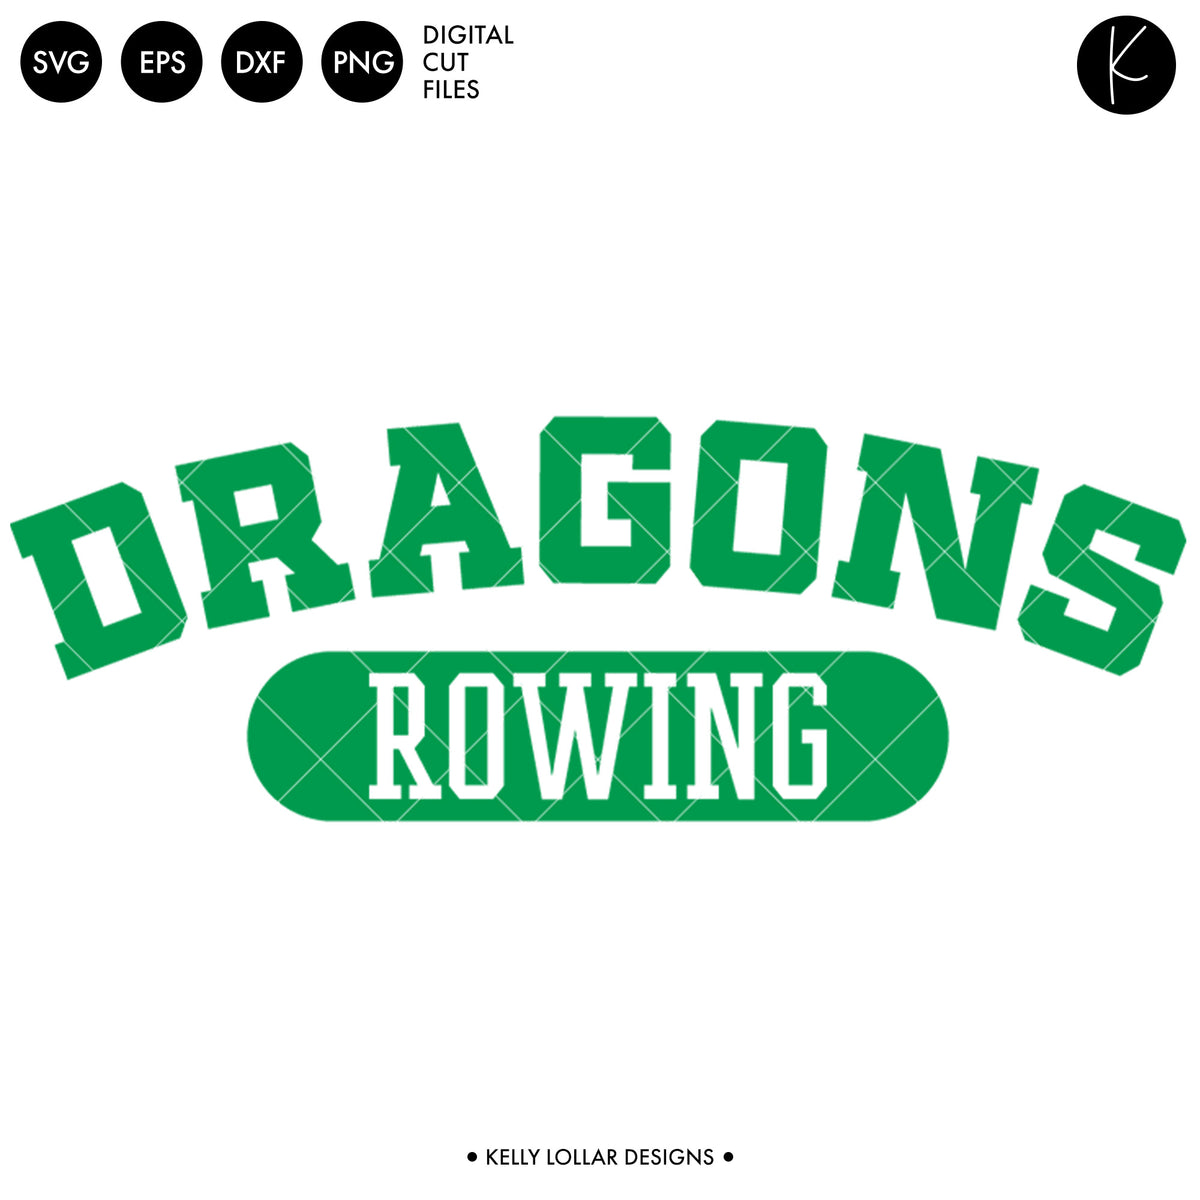 Dragons Rowing Crew Bundle | SVG DXF EPS PNG Cut Files